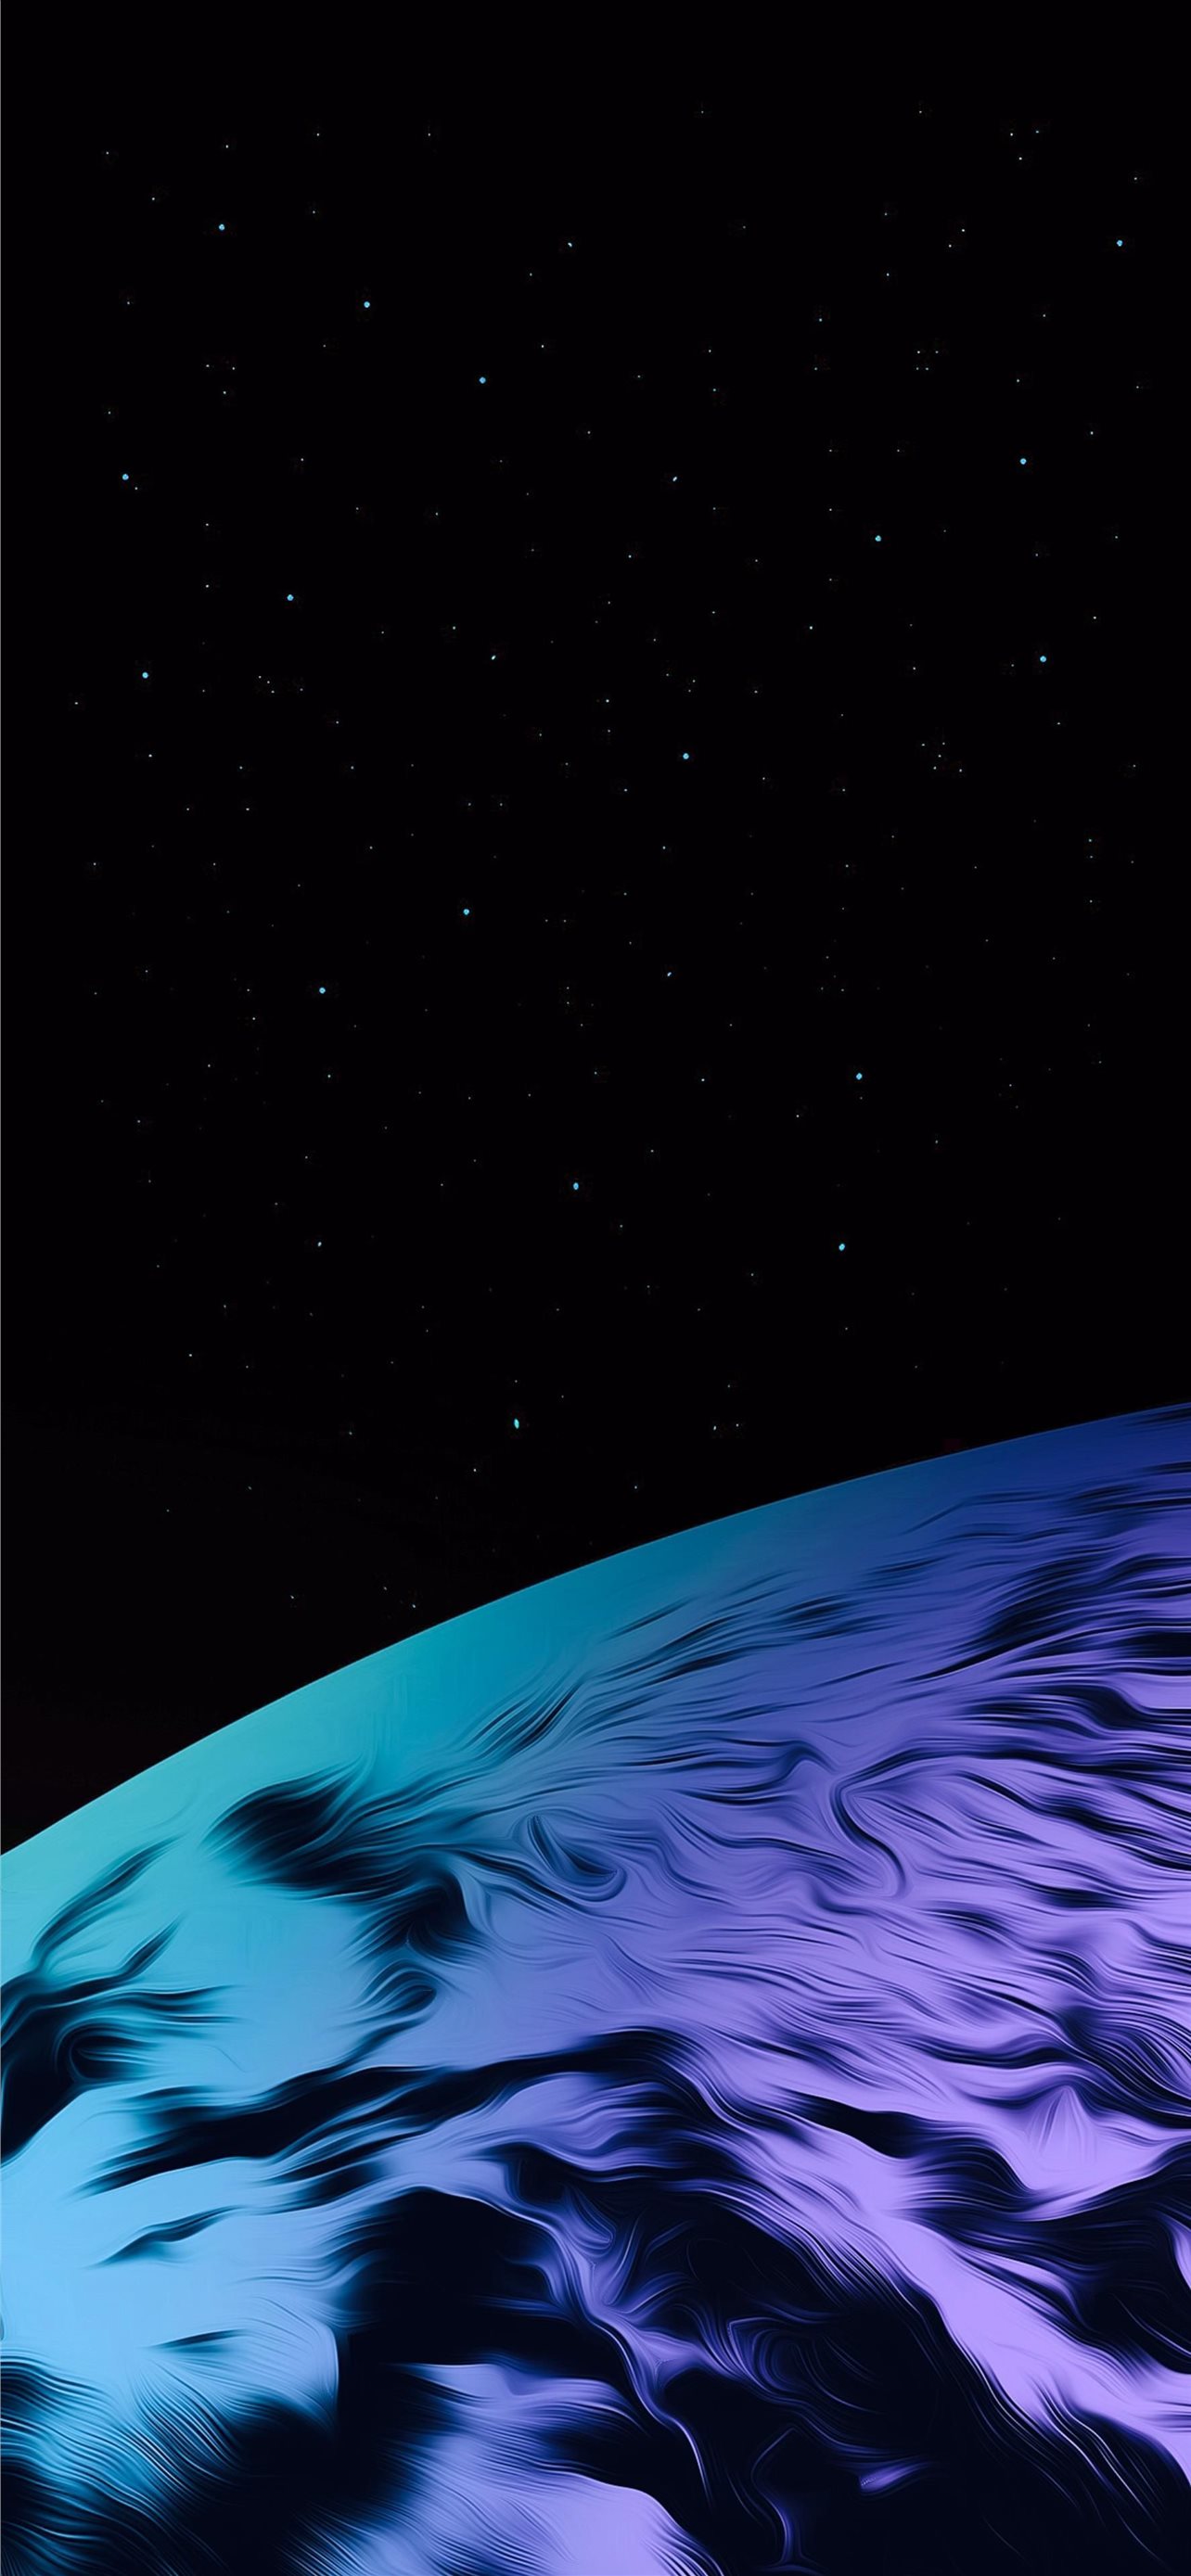 4K Iphone Amoled Wallpapers